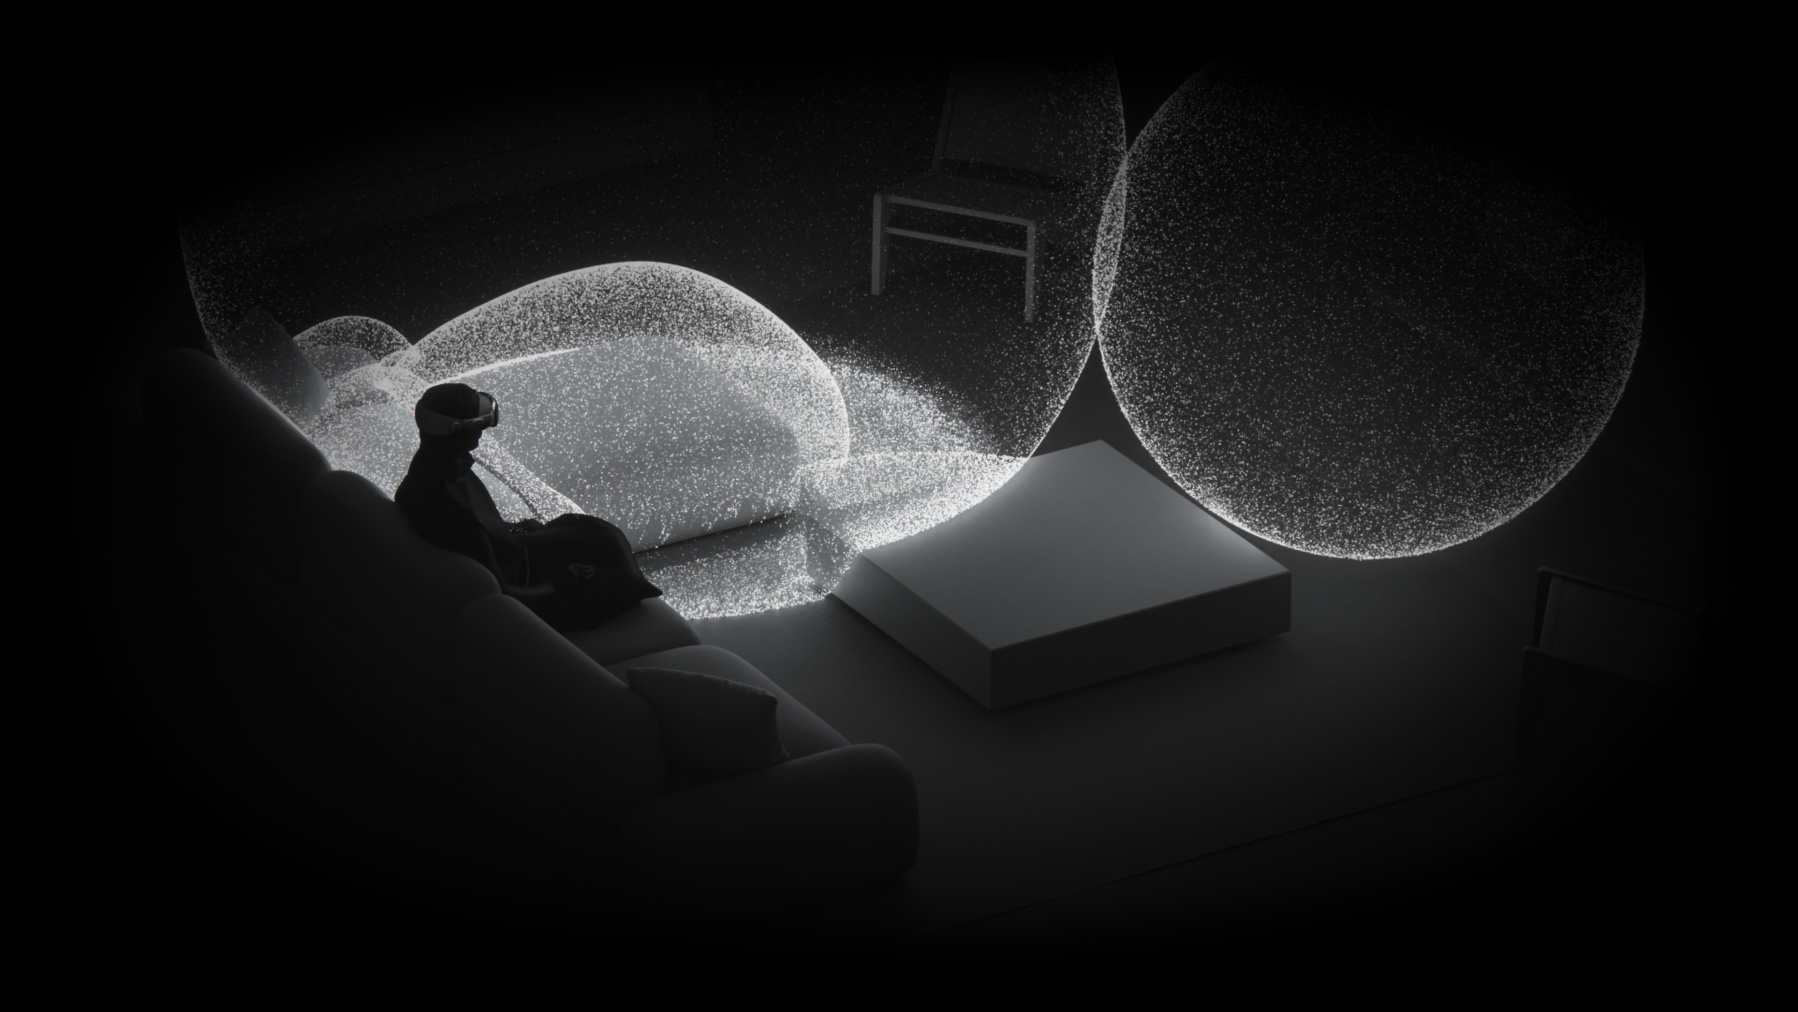 Advanced Spatial Audio analyzes the room you’re in